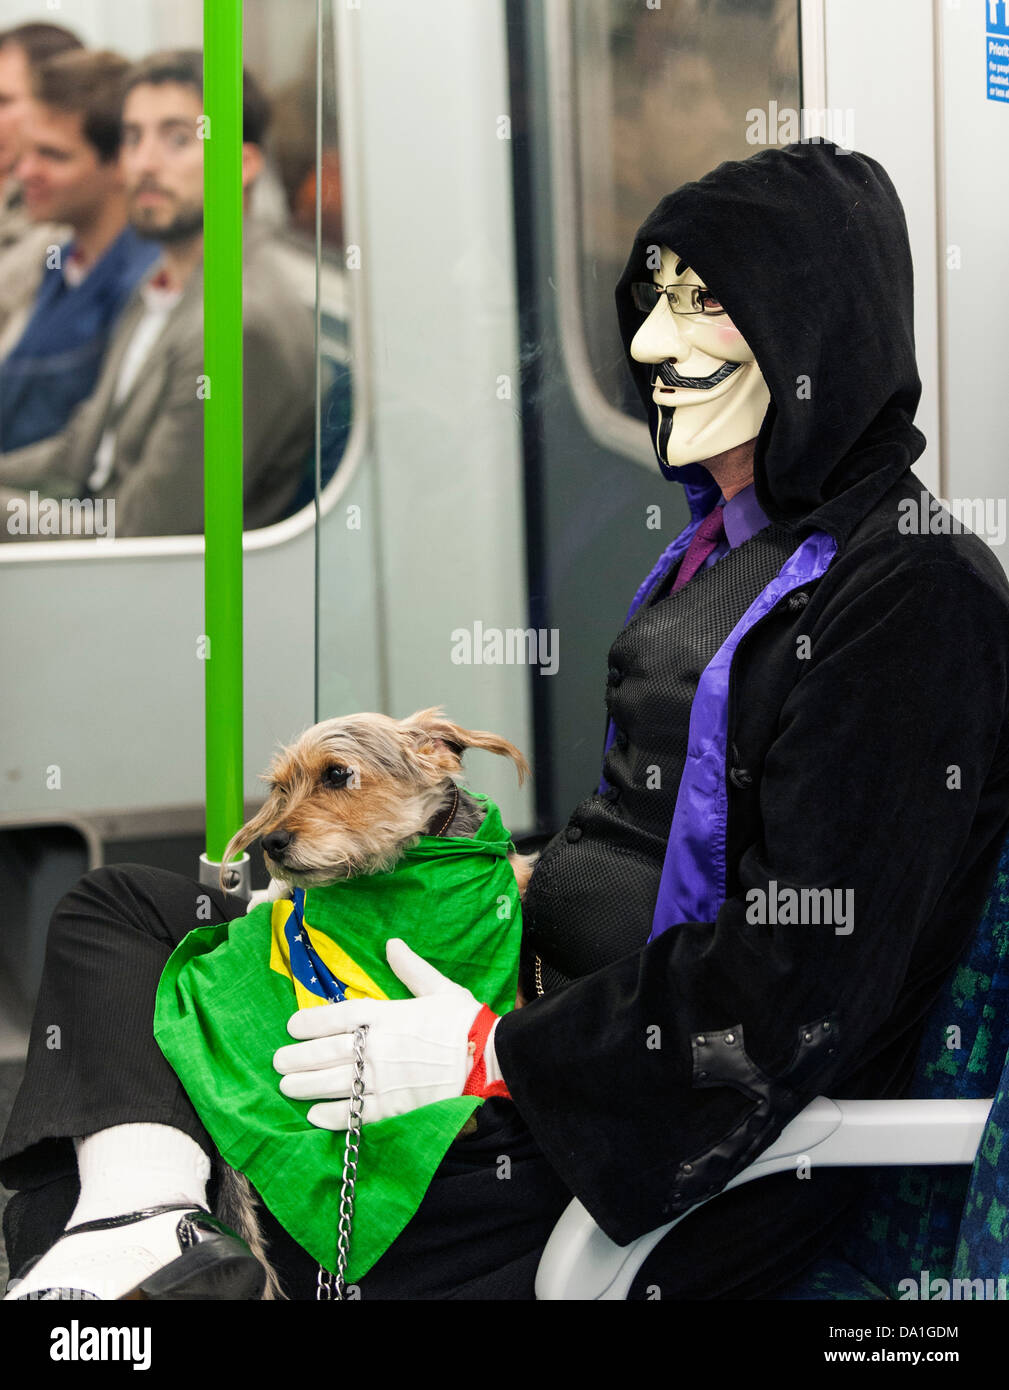 A tube passenger wearing a mask and holding a small dog on the London Underground tube train. Stock Photo